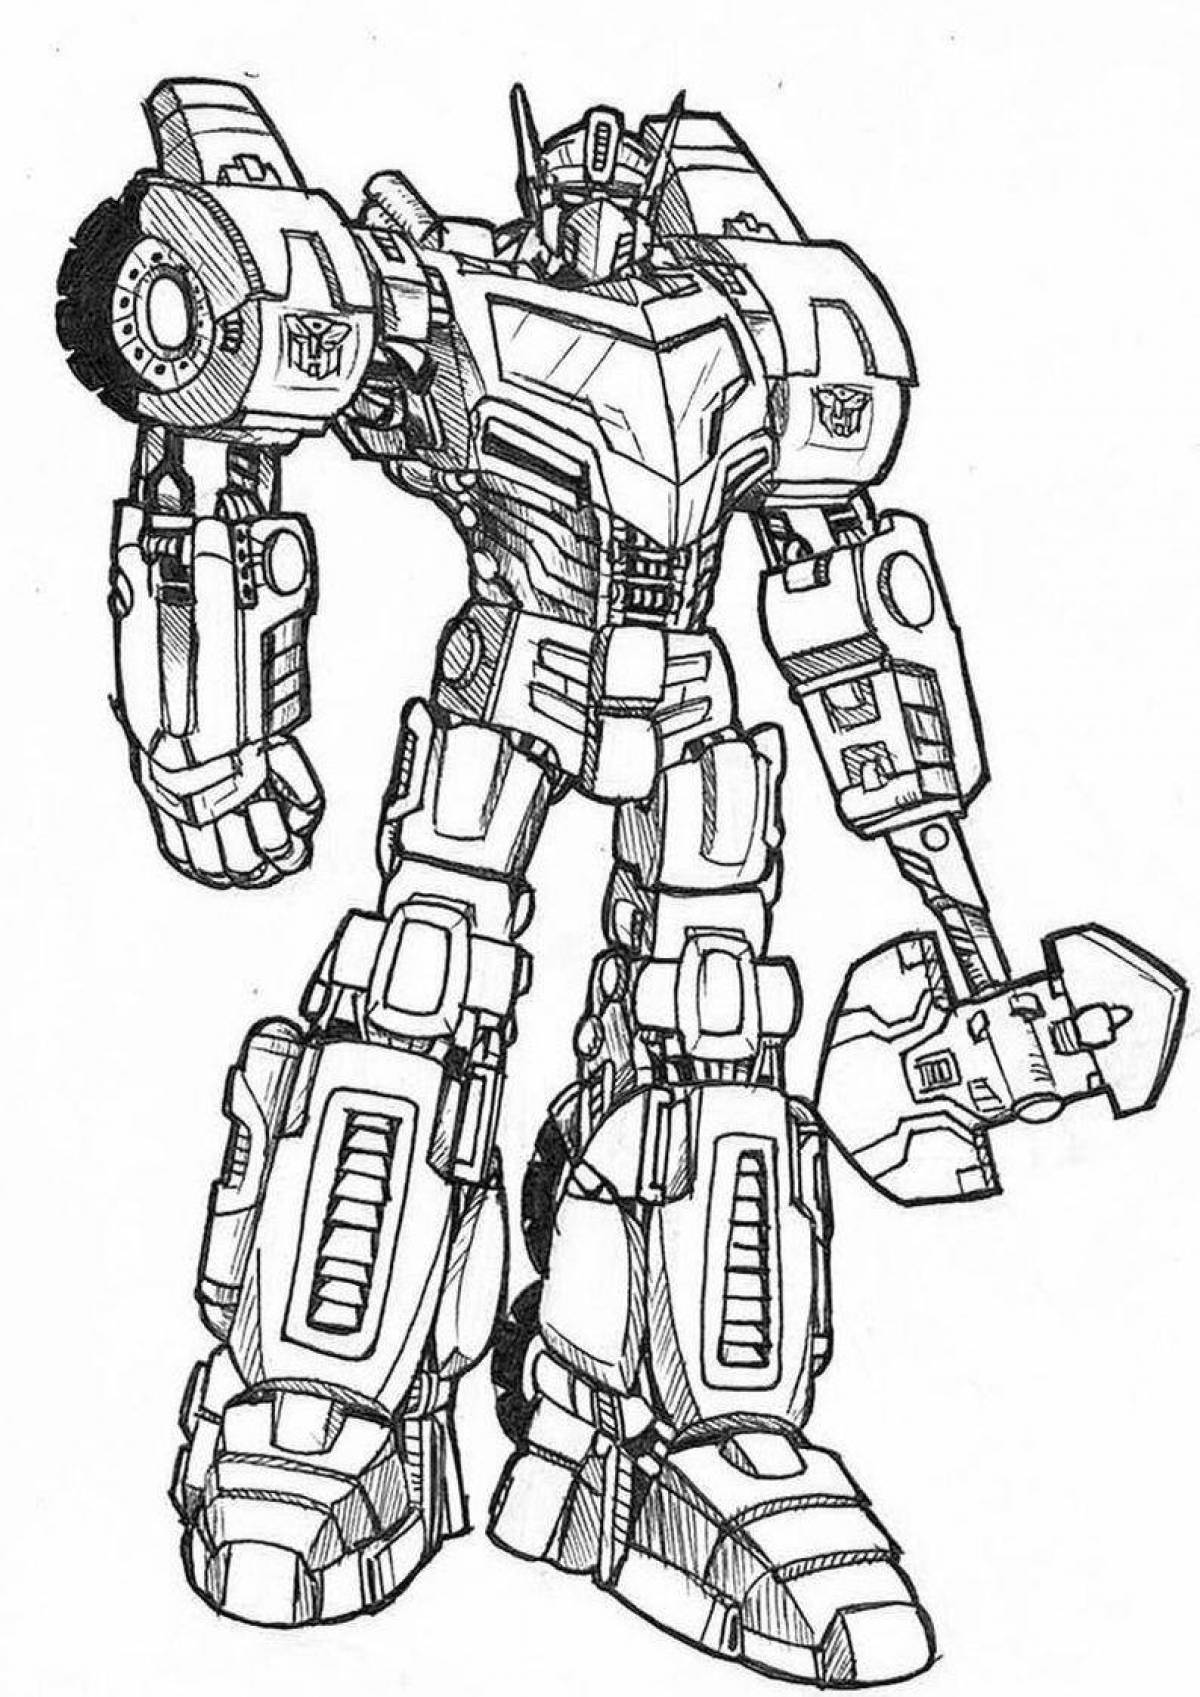 Gorgeous Autobot coloring book